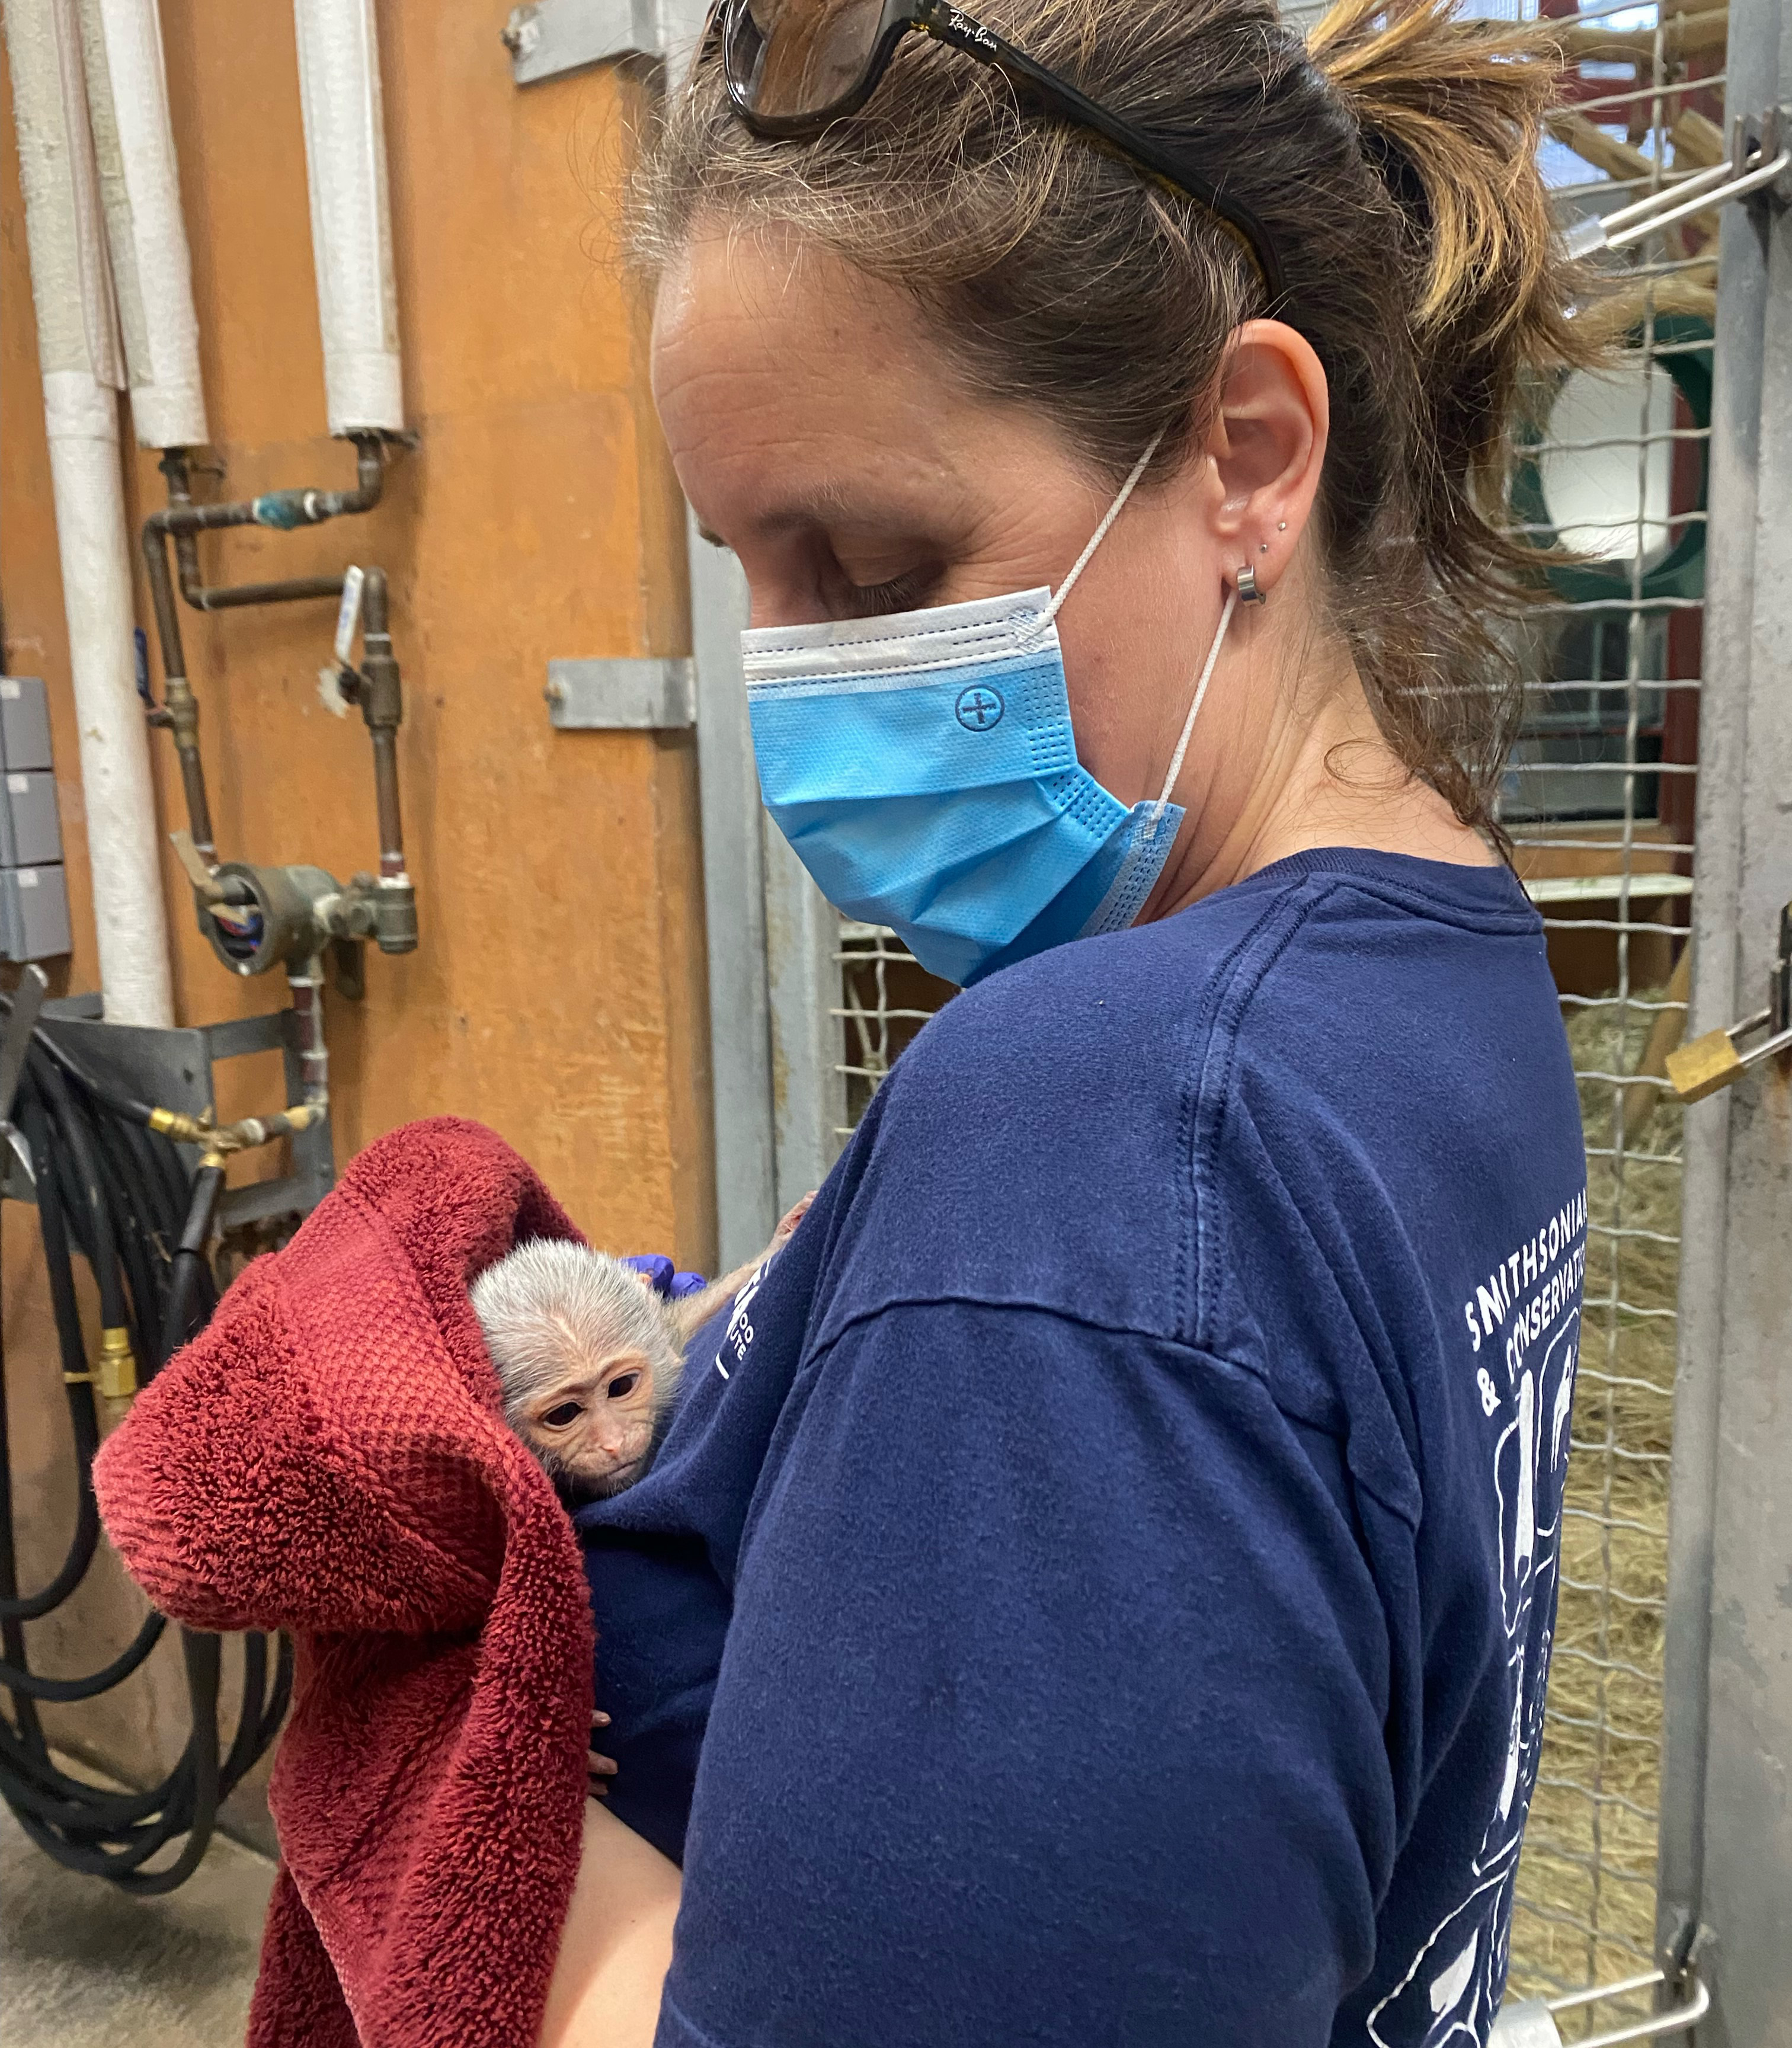 Primate keeper Becky Malinksy, wearing a blue shirt and protective face mask, cradles a newly-born swamp monkey.